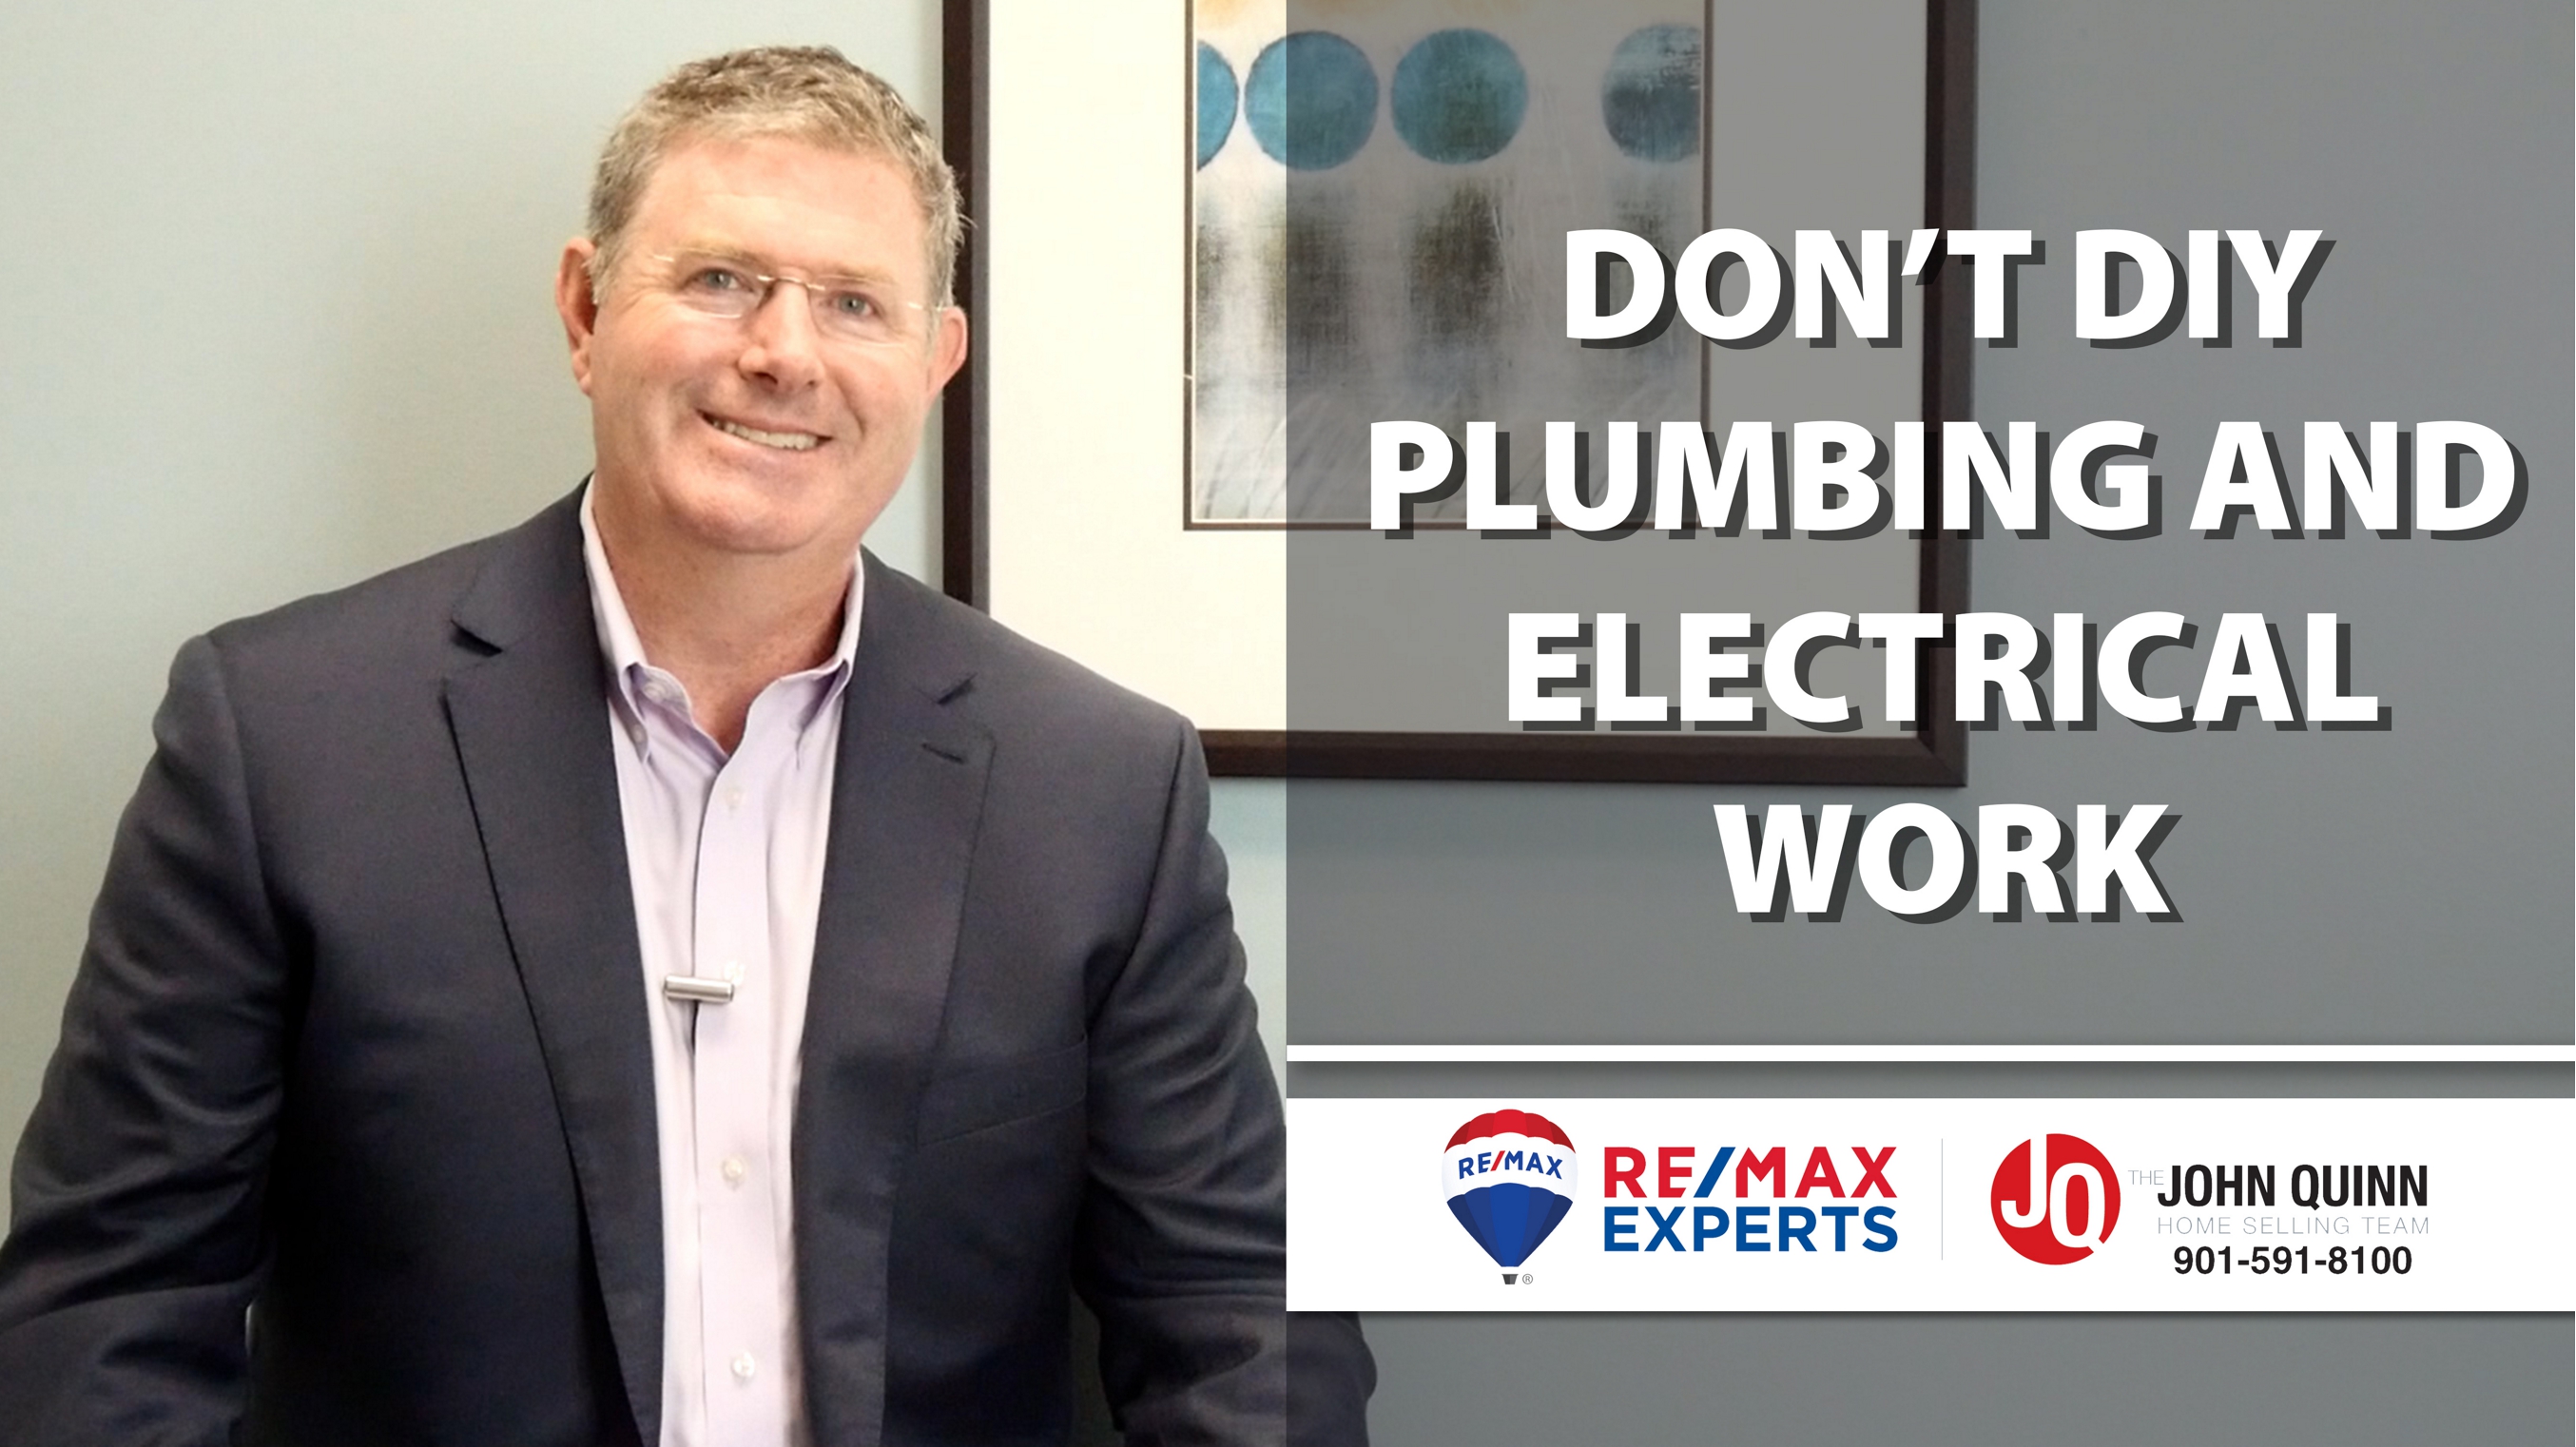 Should You Do Your Own Plumbing and Electrical Work?